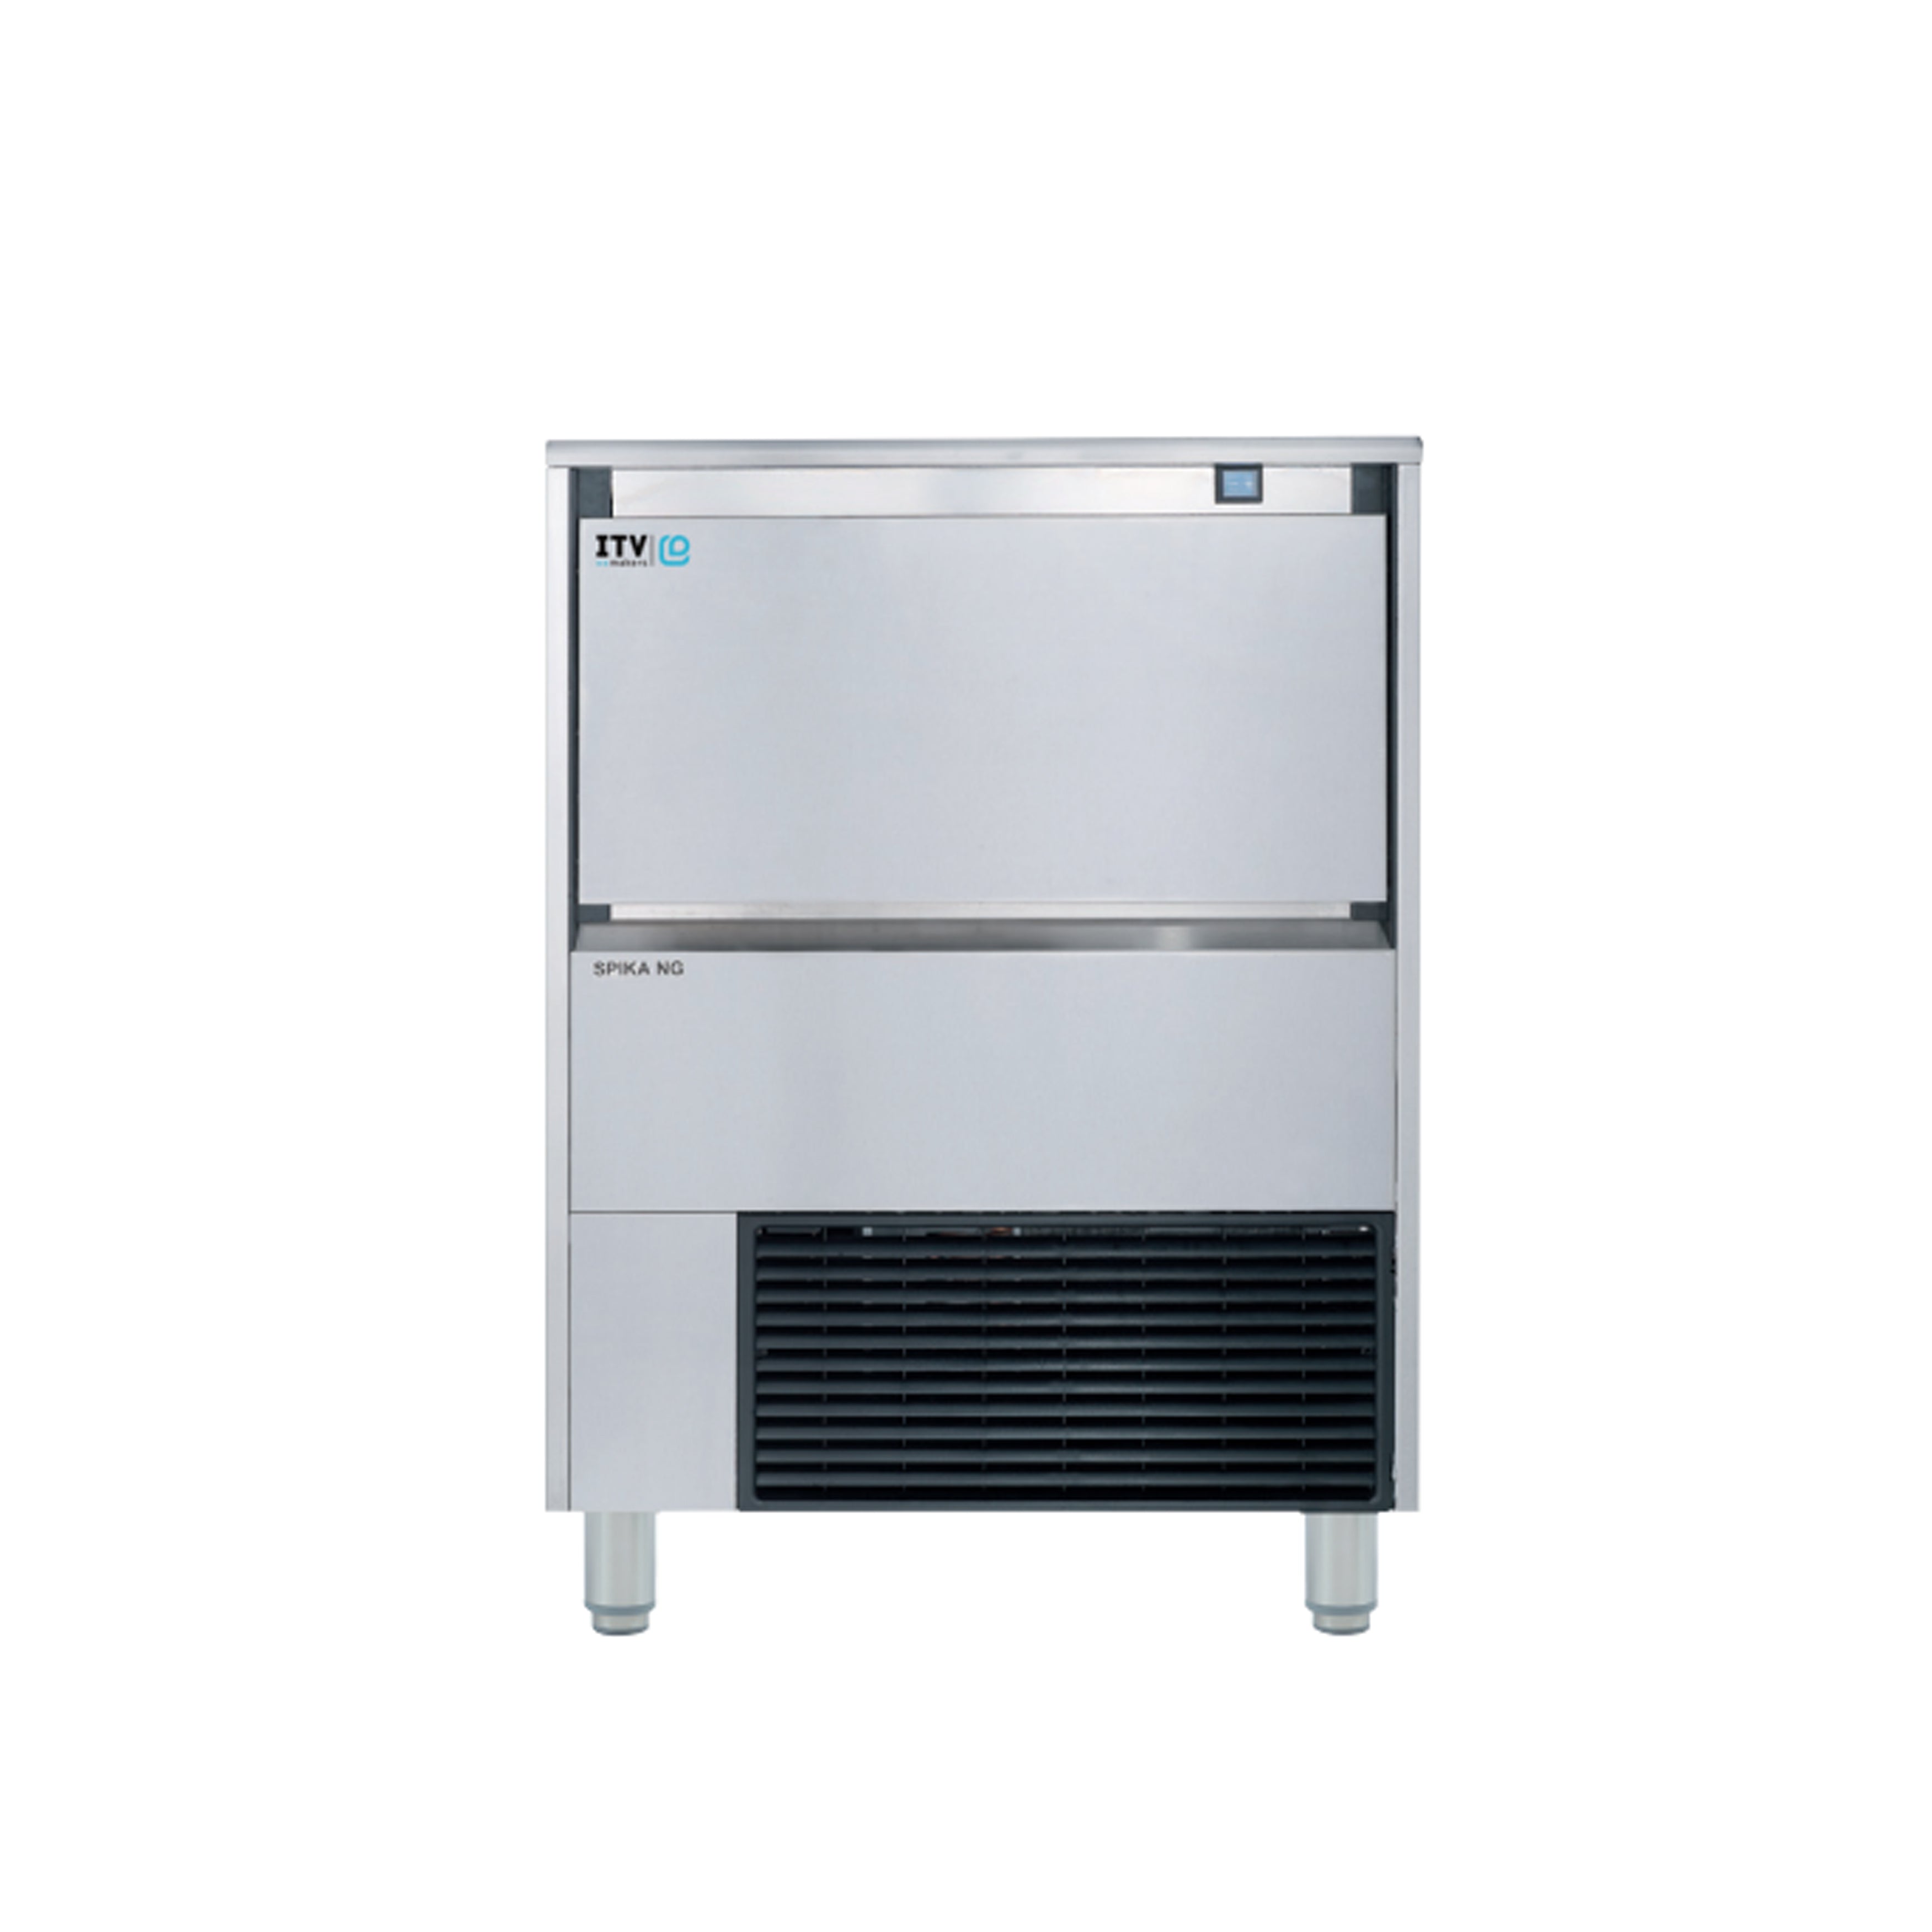 ITV - SPIKA NG 360, Commercial Spika Cubers under-counter Ice Maker Self-Contained Ice Cube Machine 342lbs